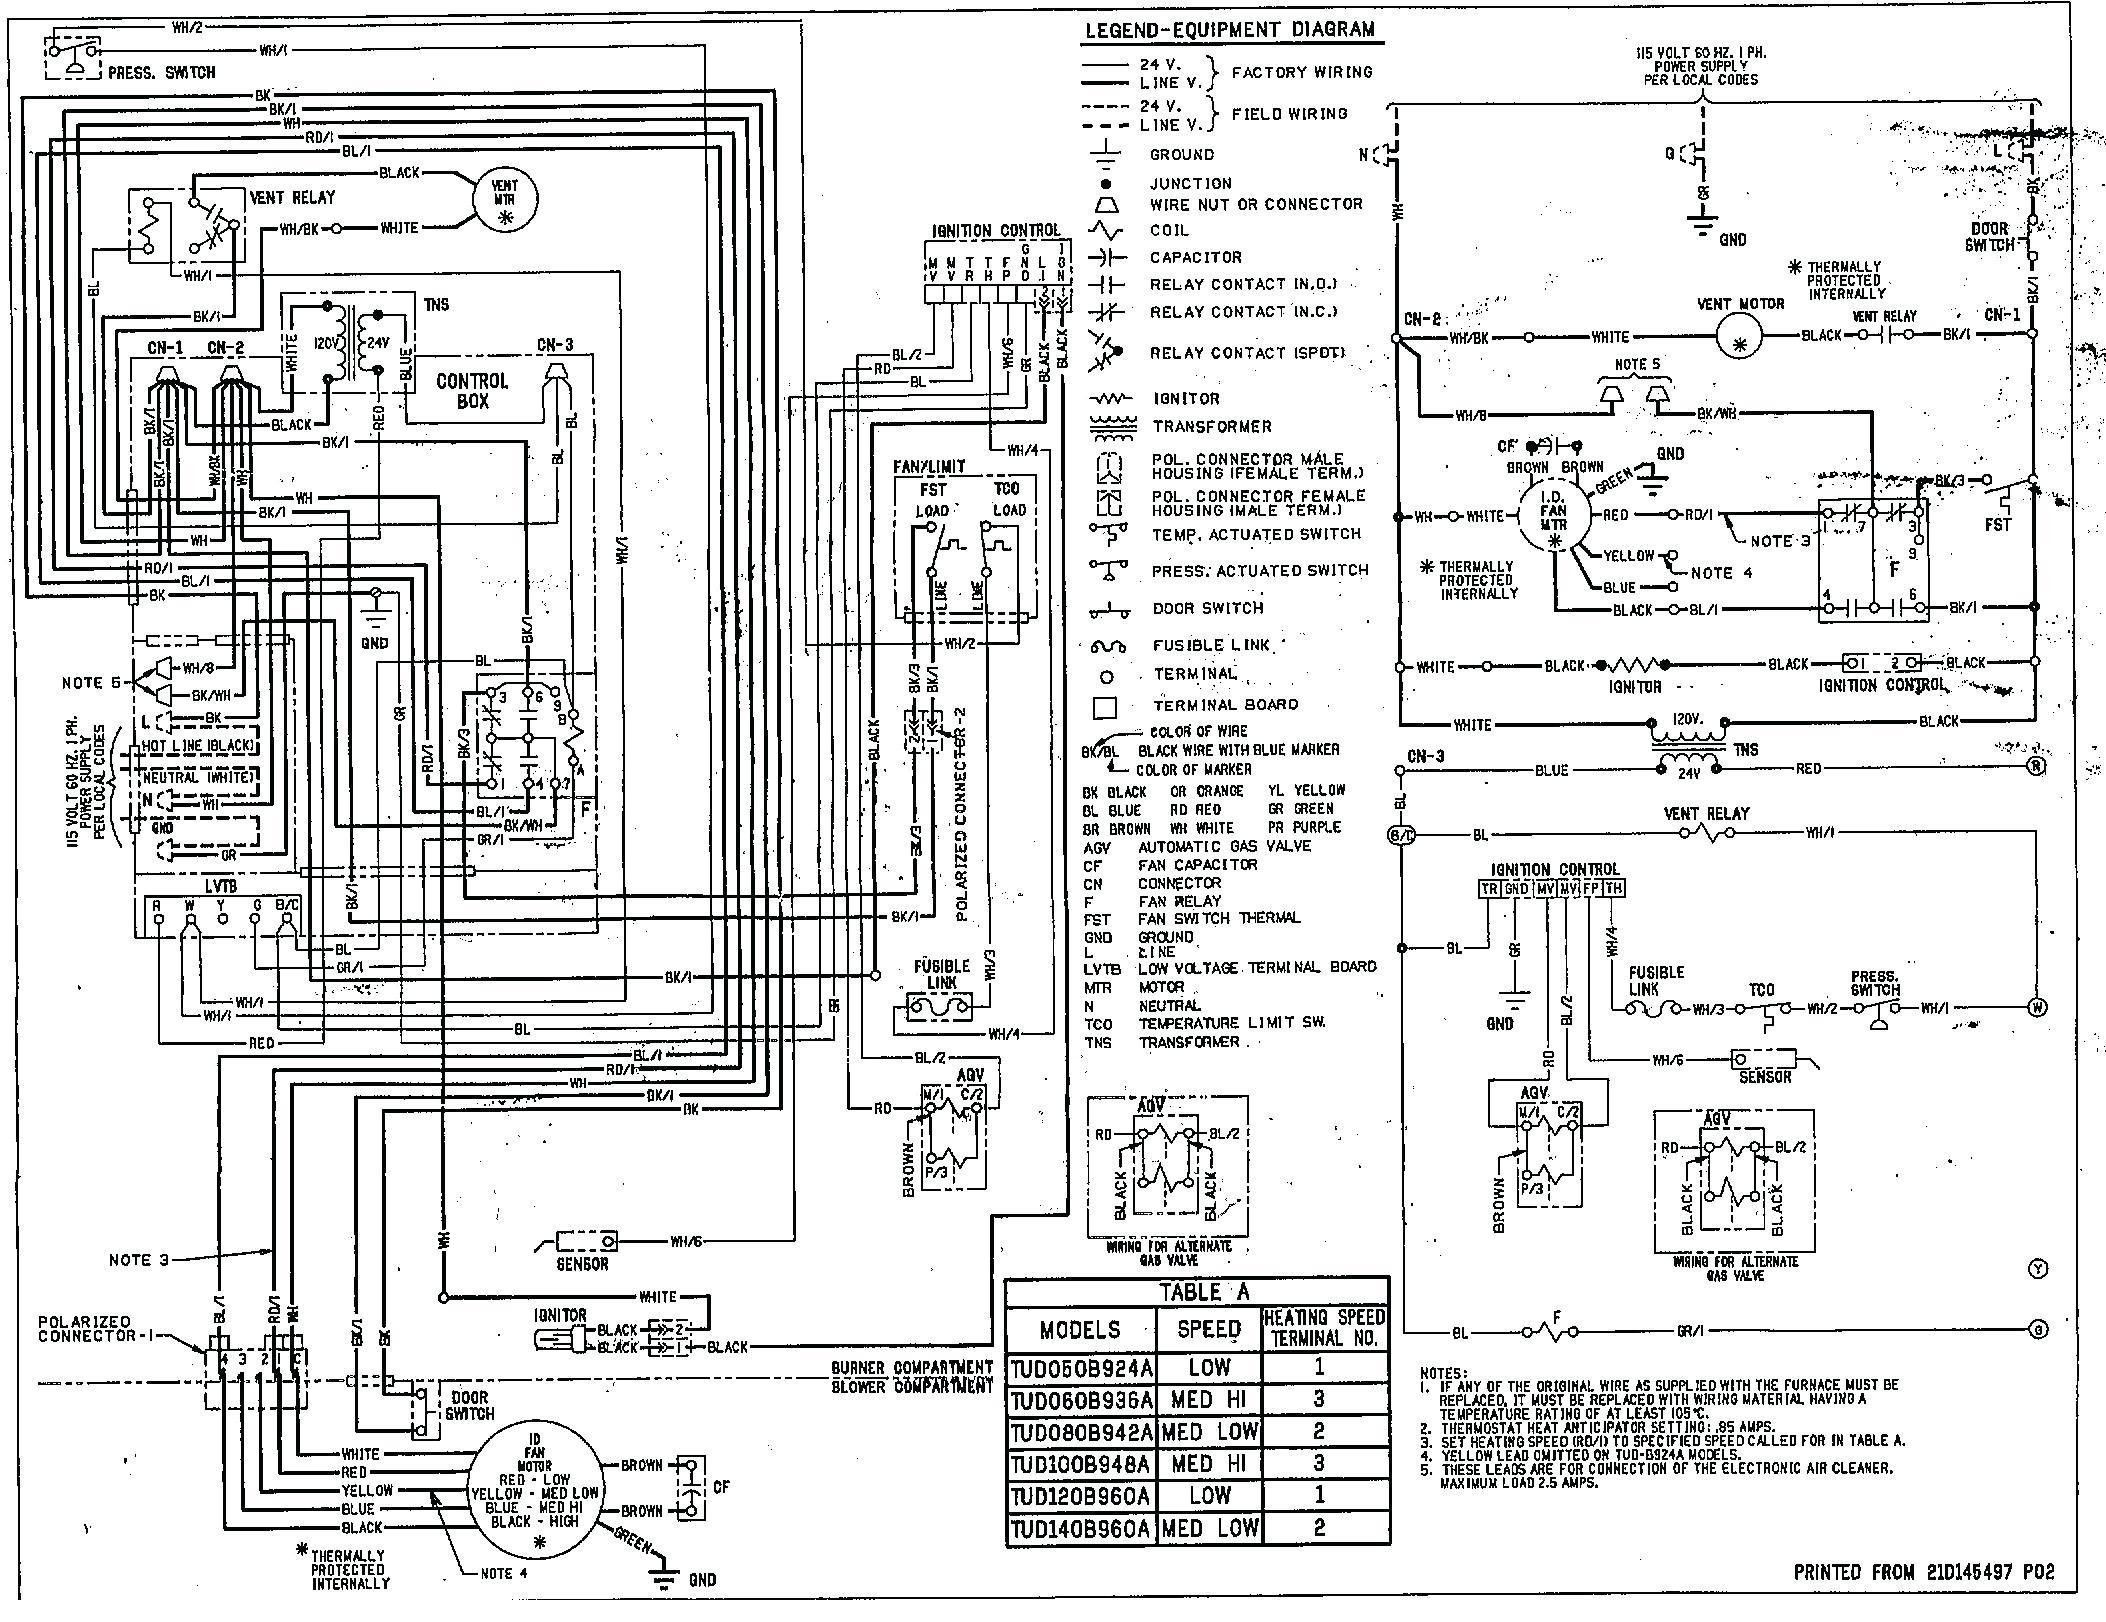 Carrier Air Conditioner Parts Diagram Wiring Diagram for Carrier Gas Furnace Fresh Payne Gas Furnace Gas Of Carrier Air Conditioner Parts Diagram